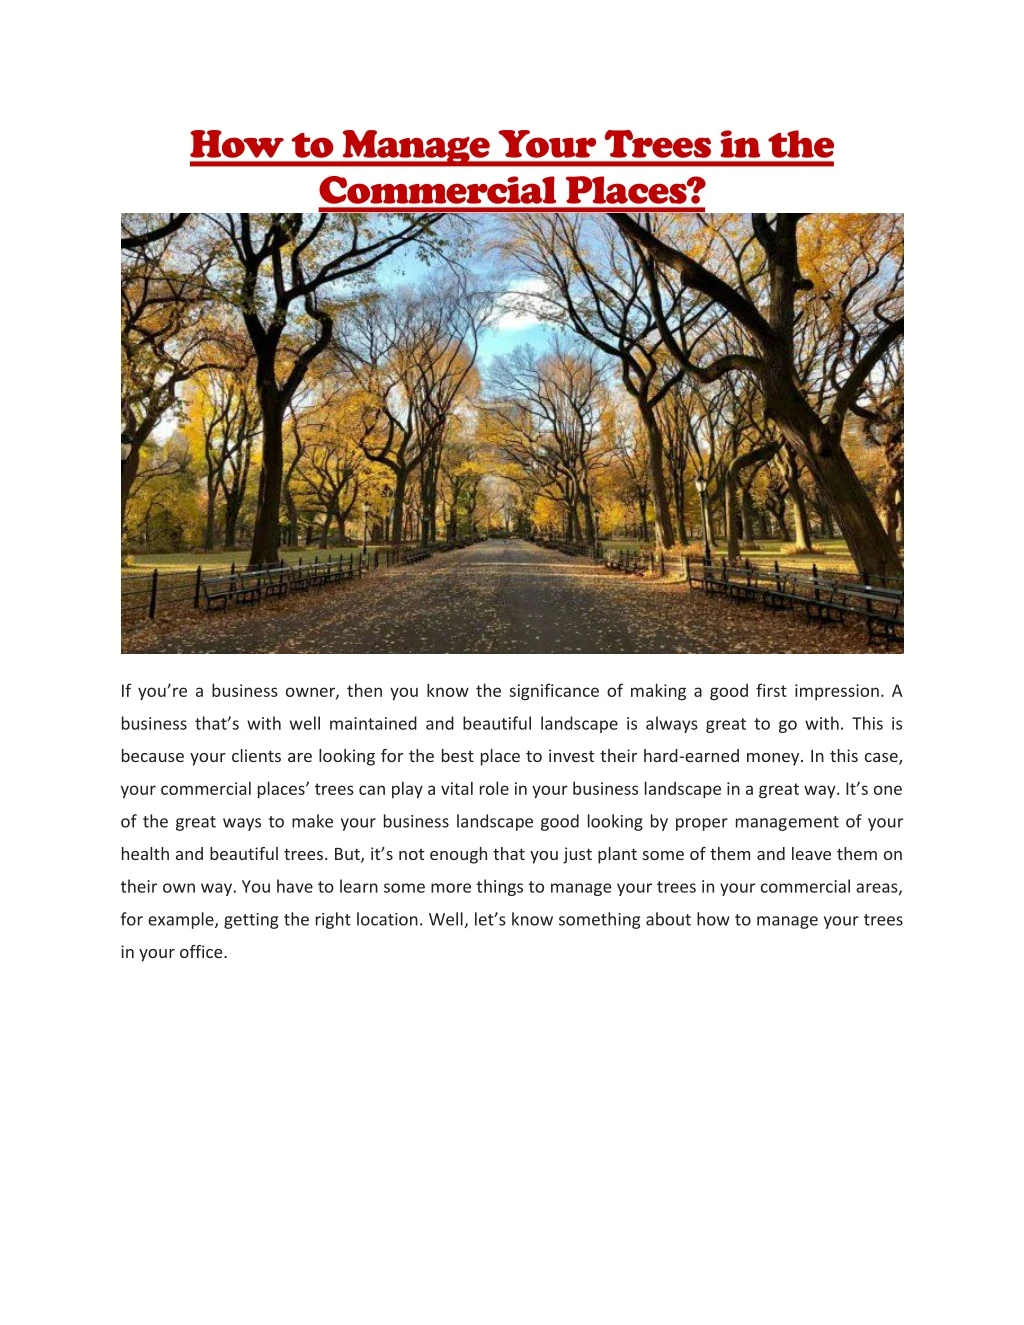 how to manage your trees in the commercial places